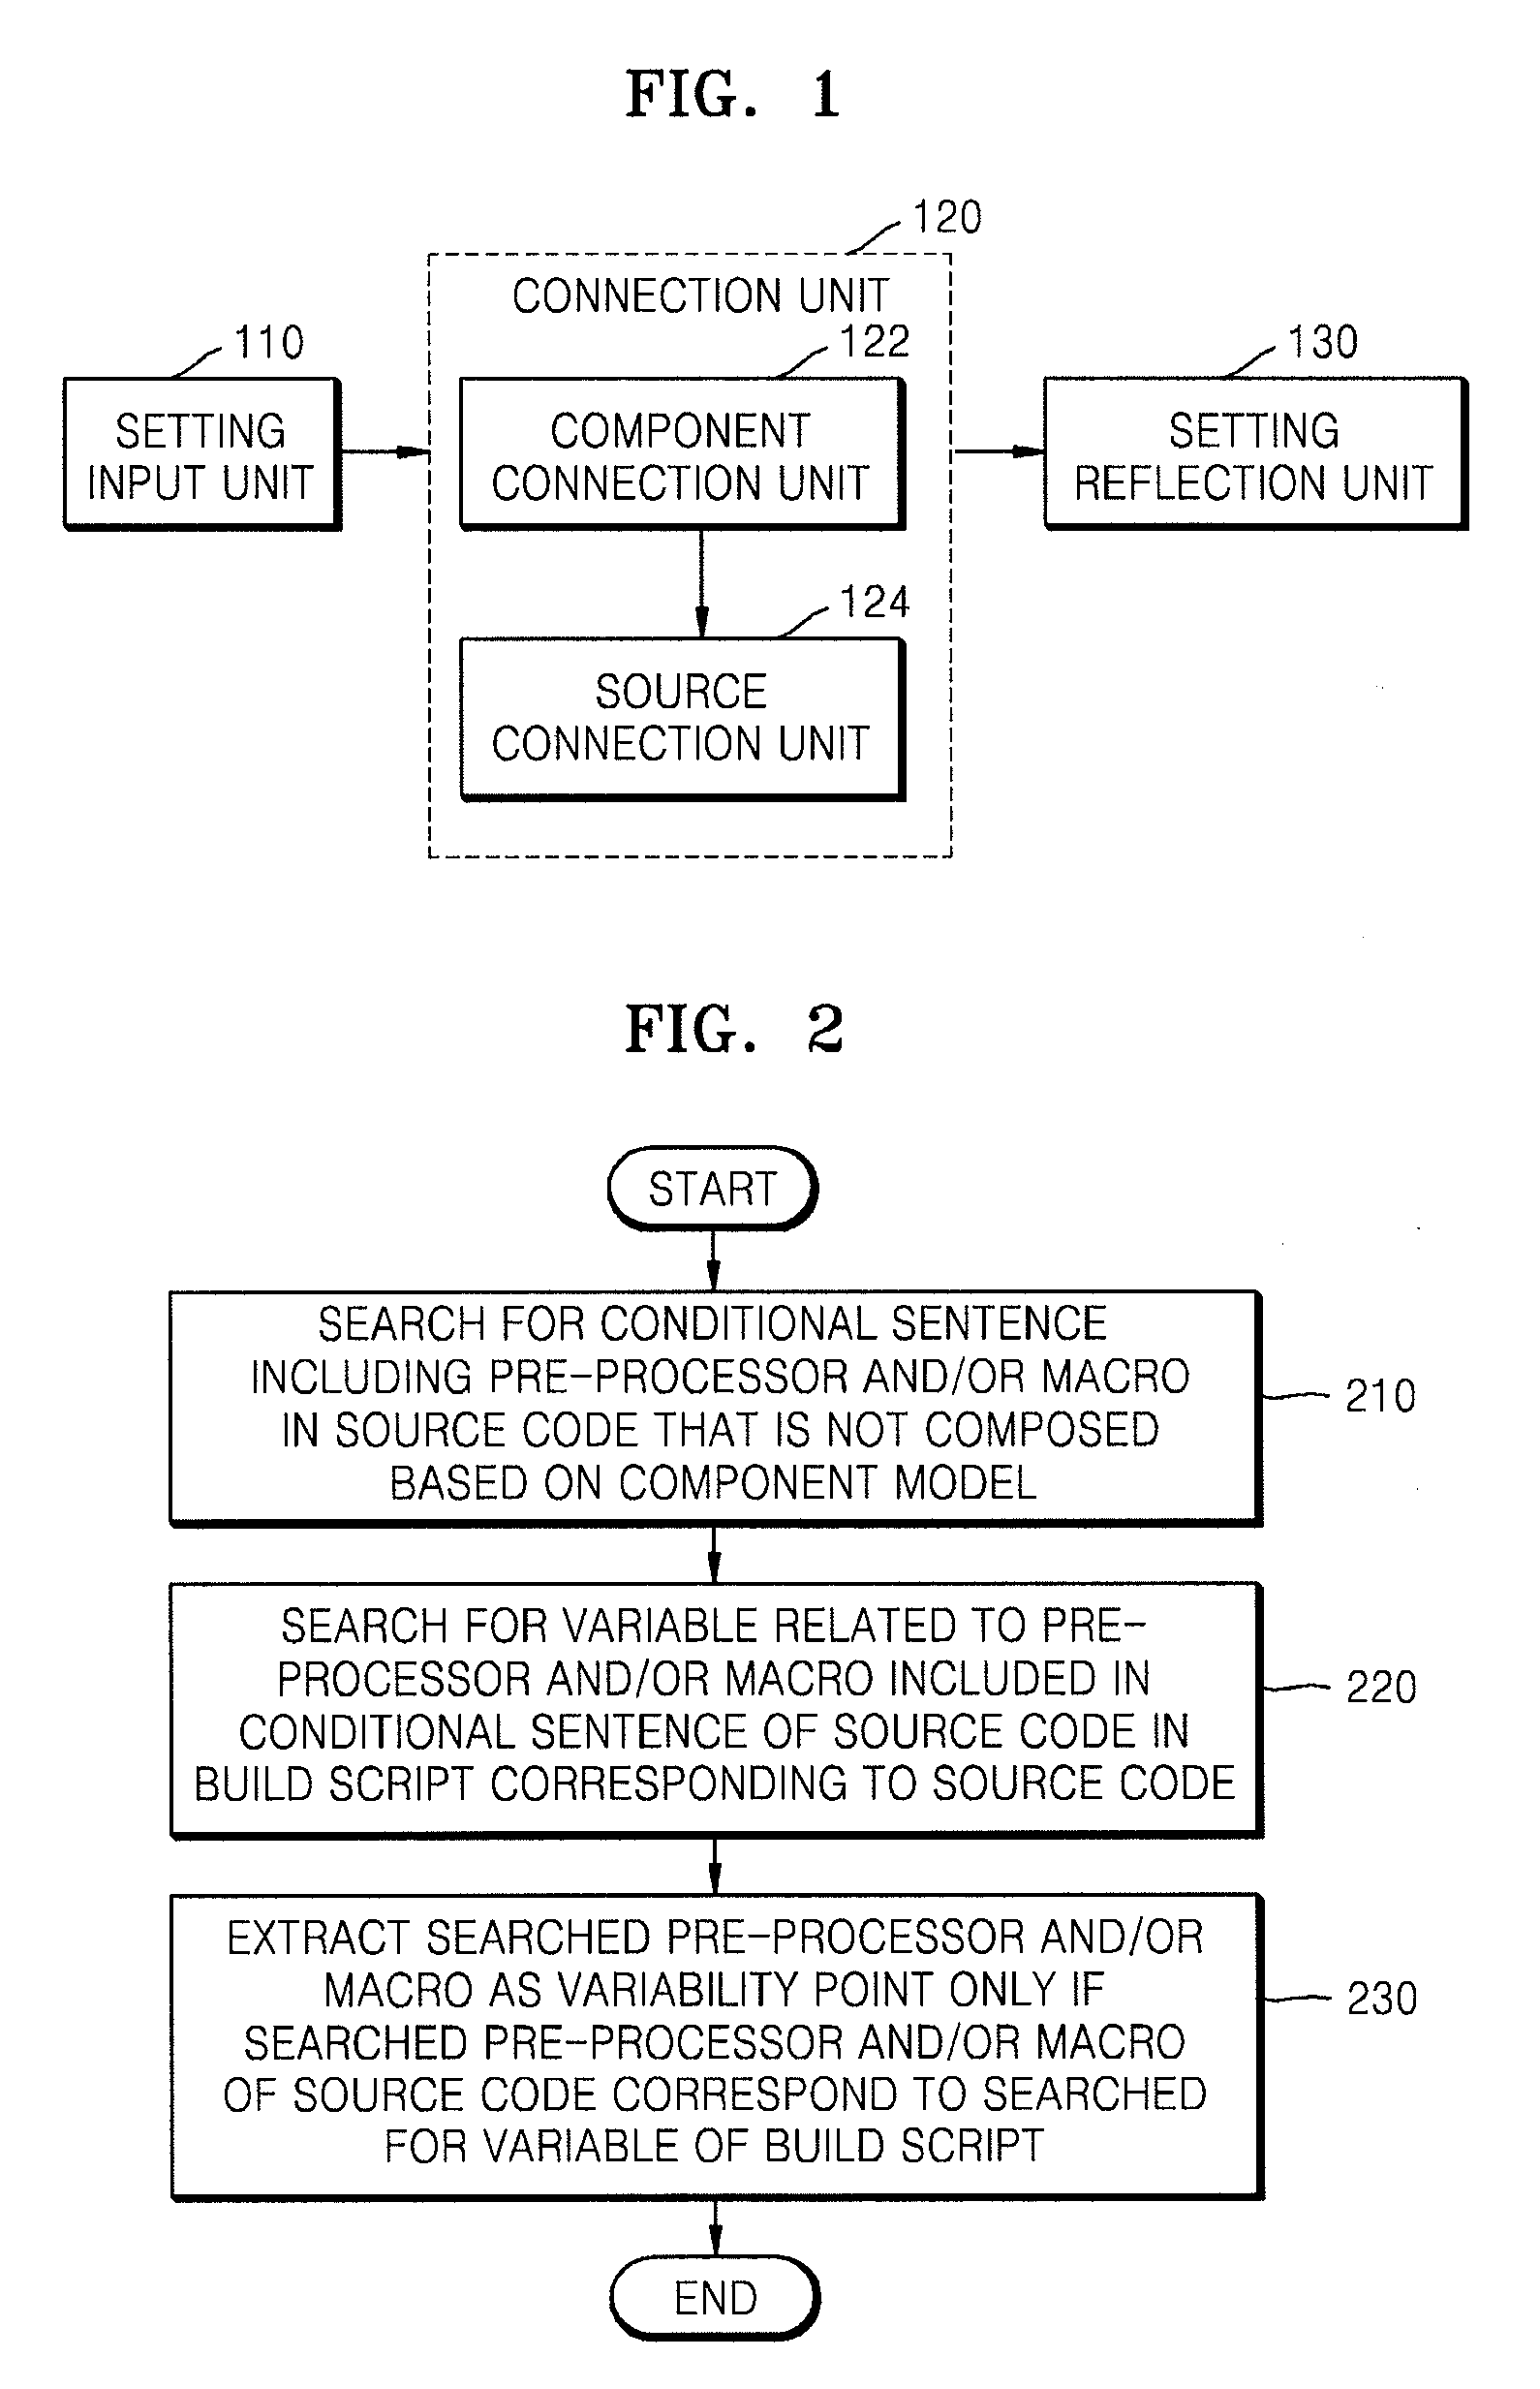 Method and apparatus for managing variability points